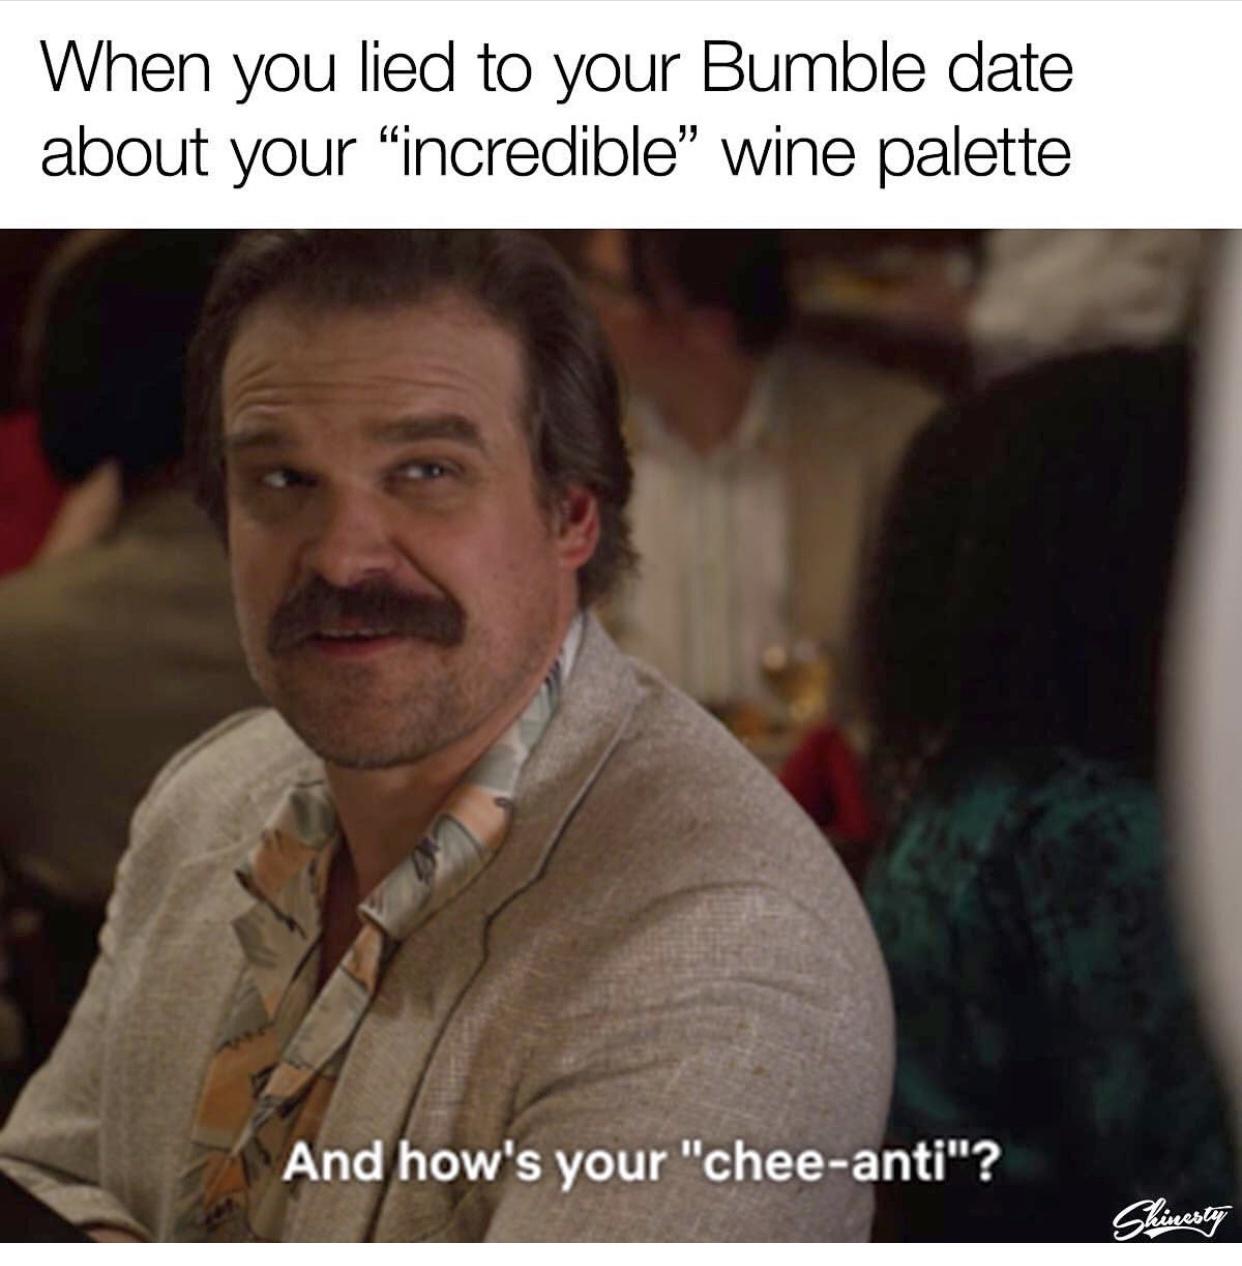 funny memes - dank memes - photo caption - When you lied to your Bumble date about your "incredible" wine palette And how's your "cheeanti"? Shinesty